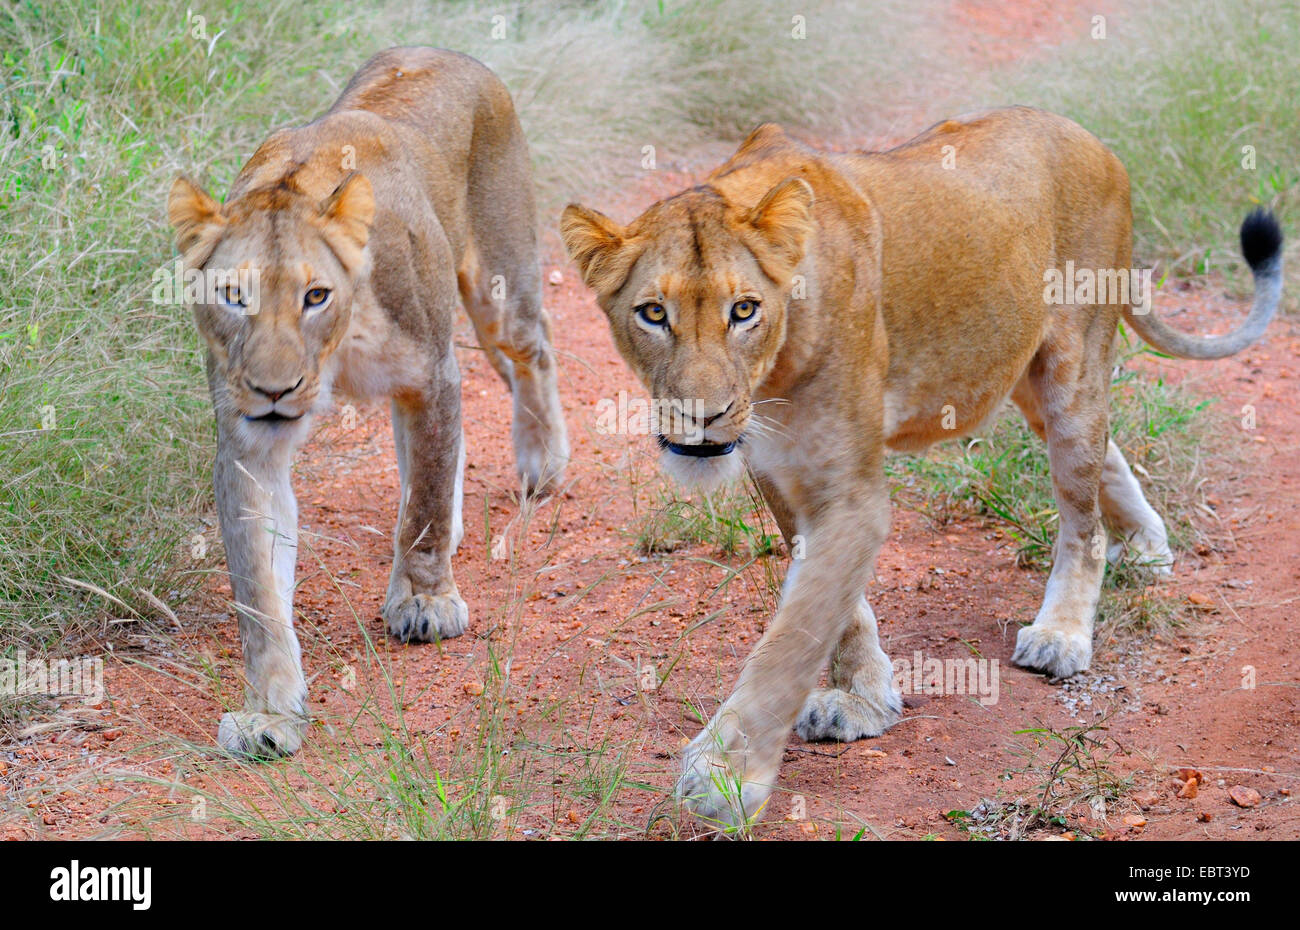 lion (Panthera leo), two lionesses hunting, South Africa, Krueger National Park Stock Photo